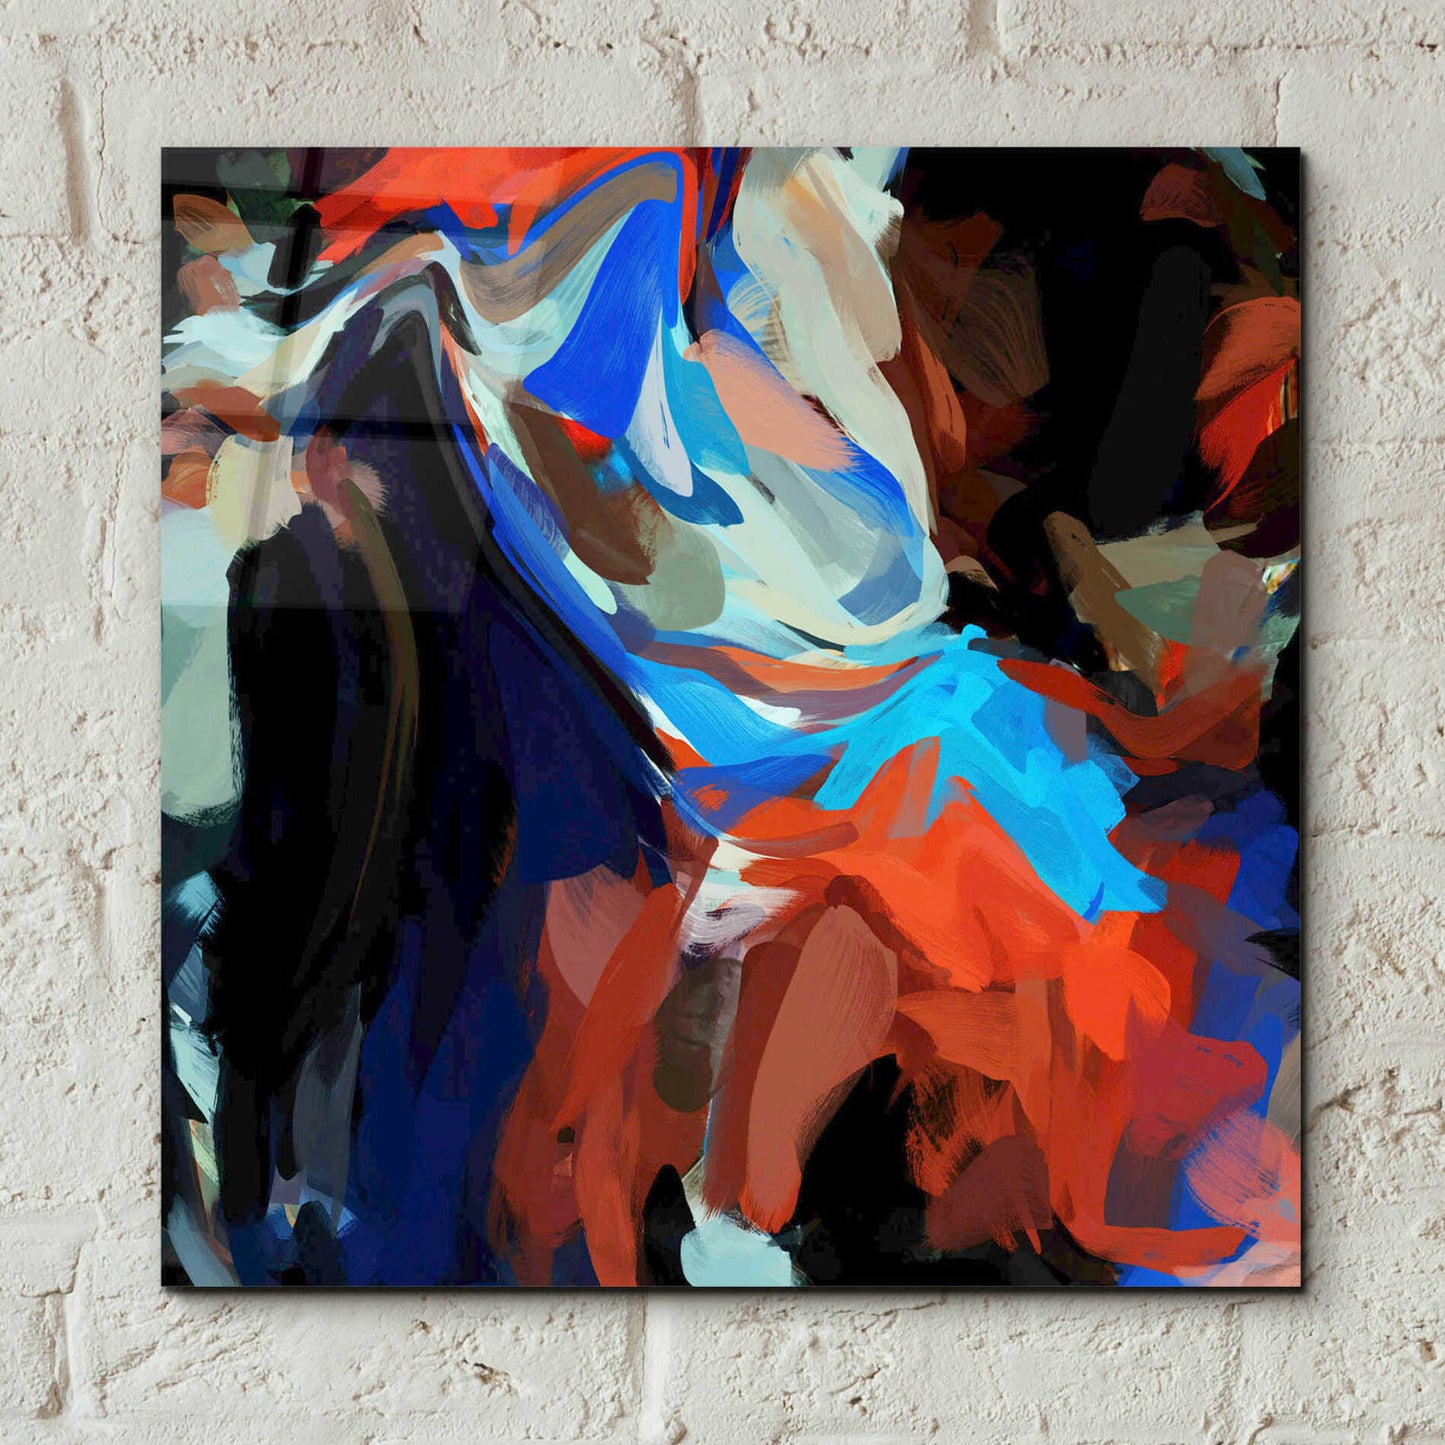 Epic Art 'Inverted Abstract Colorful Flows 12' by Irena Orlov Acrylic Glass Wall Art,12x12